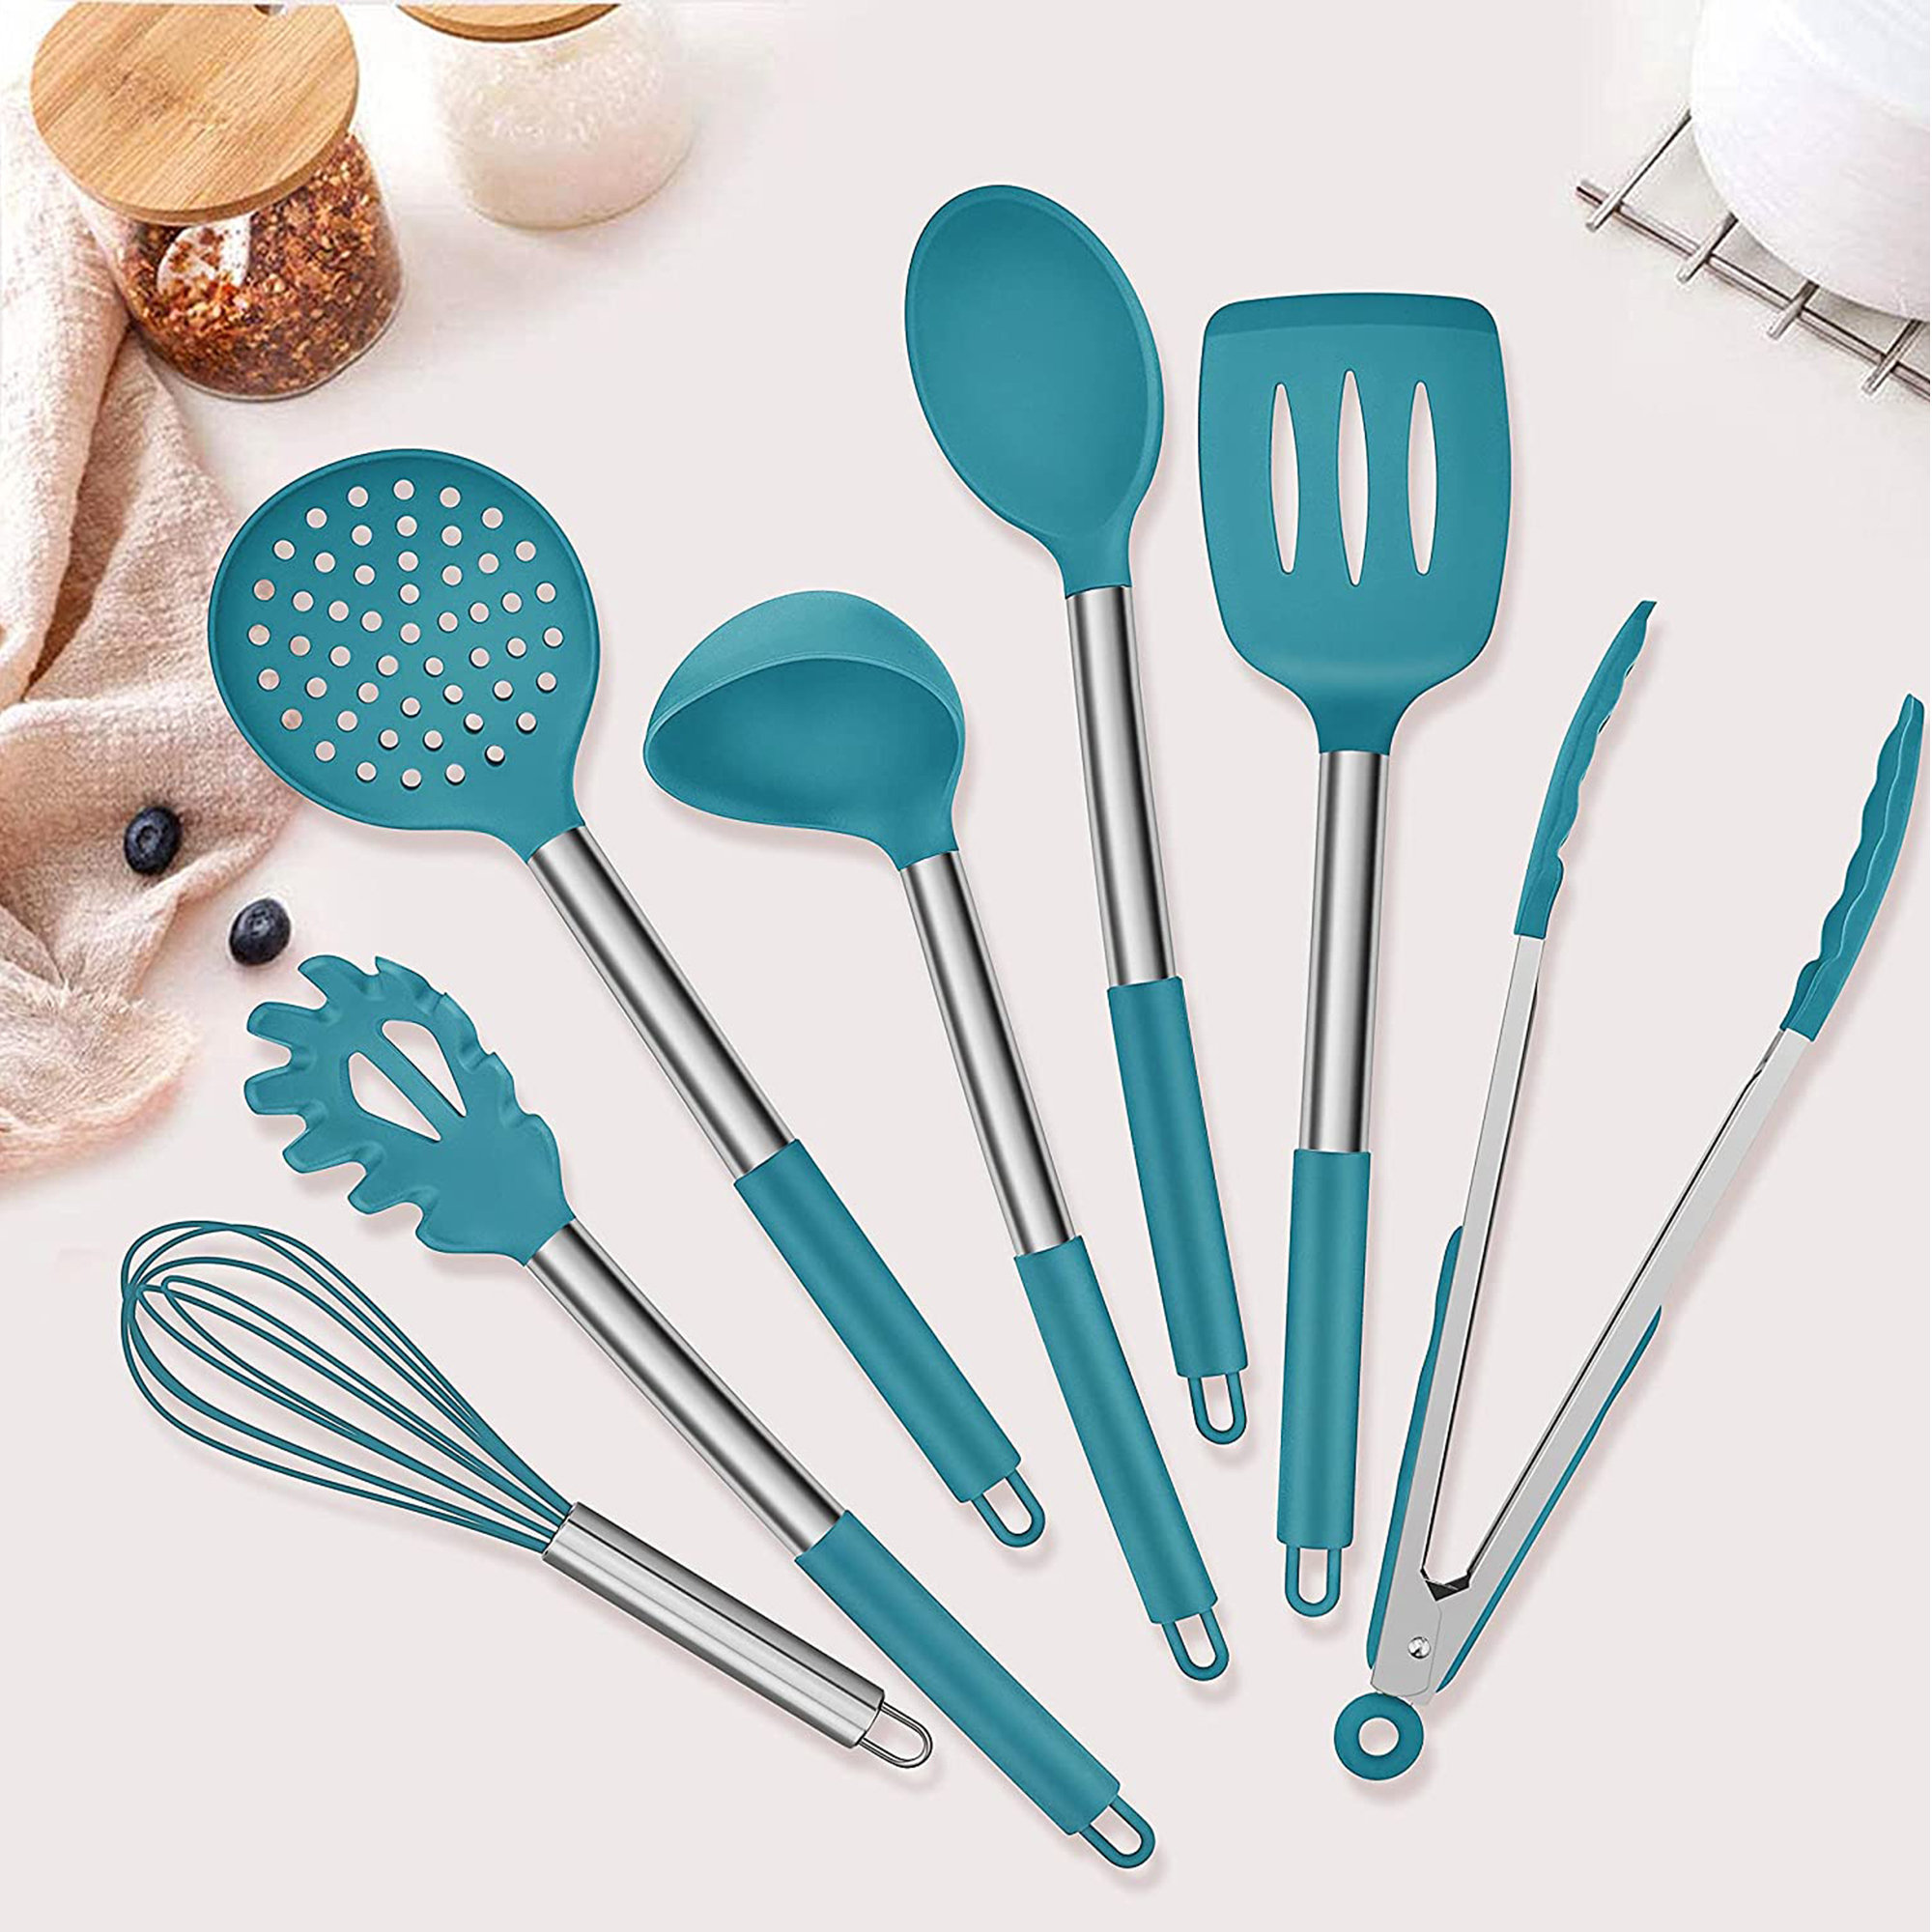 Silicone Cooking Utensil Set, Umite Chef 15pcs Silicone Cooking Kitchen Utensils Set, Non-Stick - Best Kitchen Cookware with Stainless Steel Handle